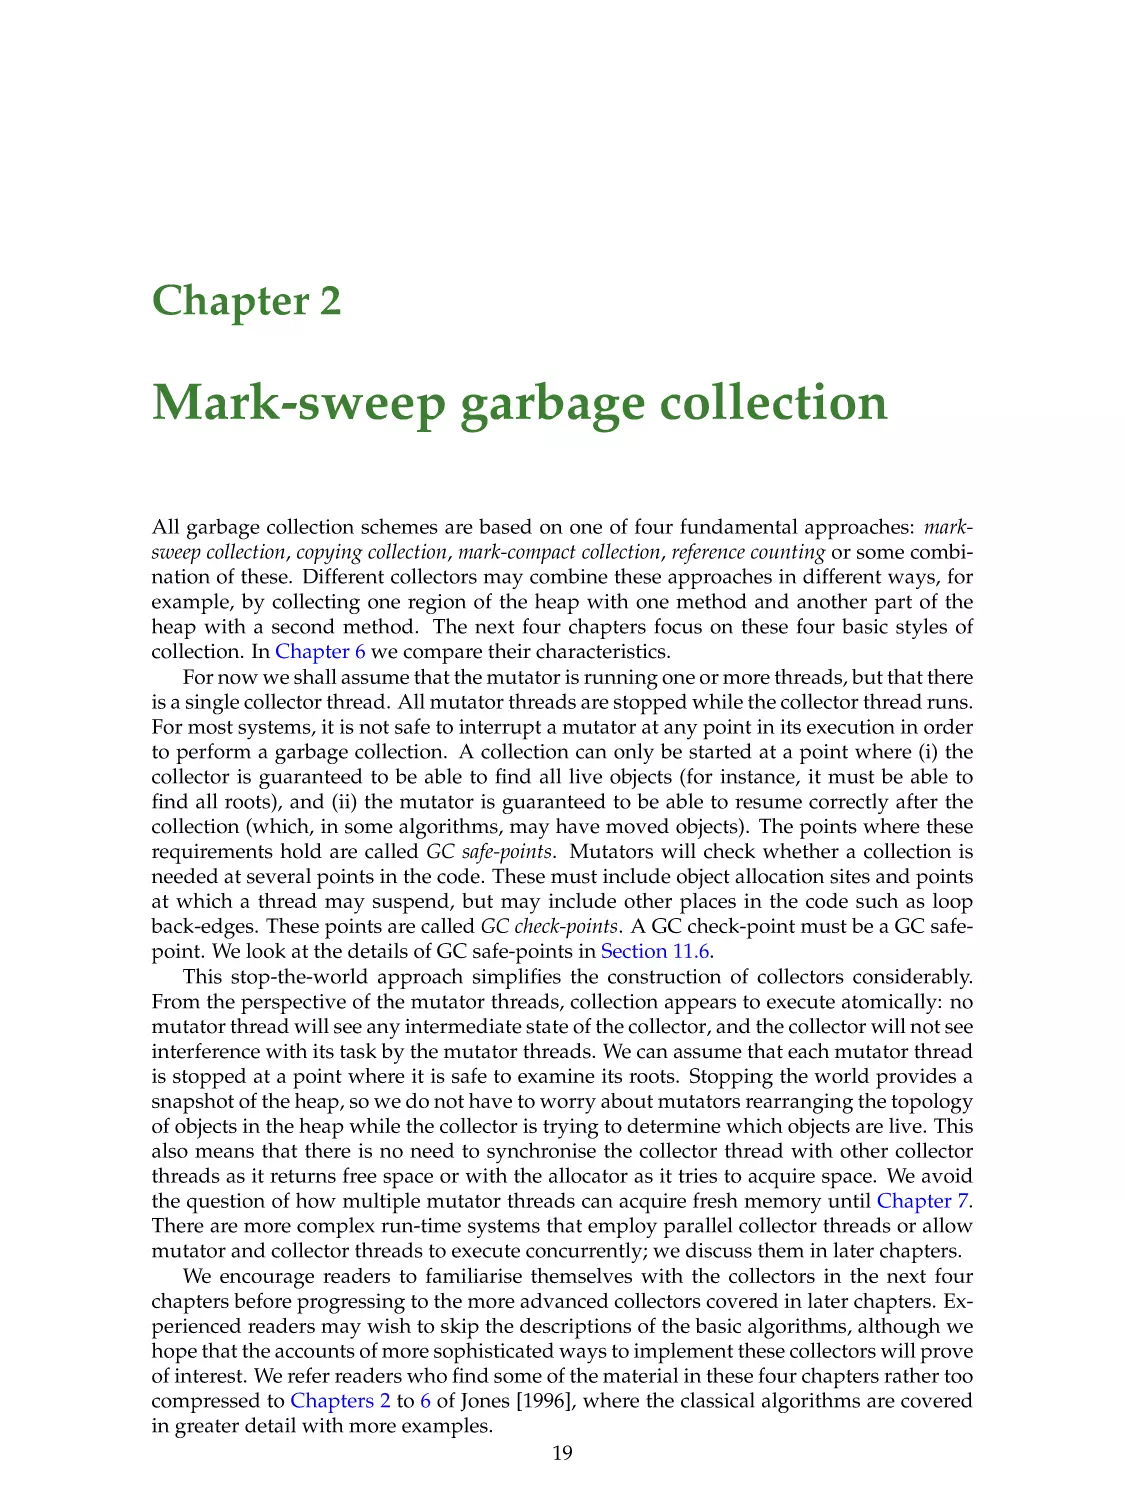 2. Mark-sweep garbage collection